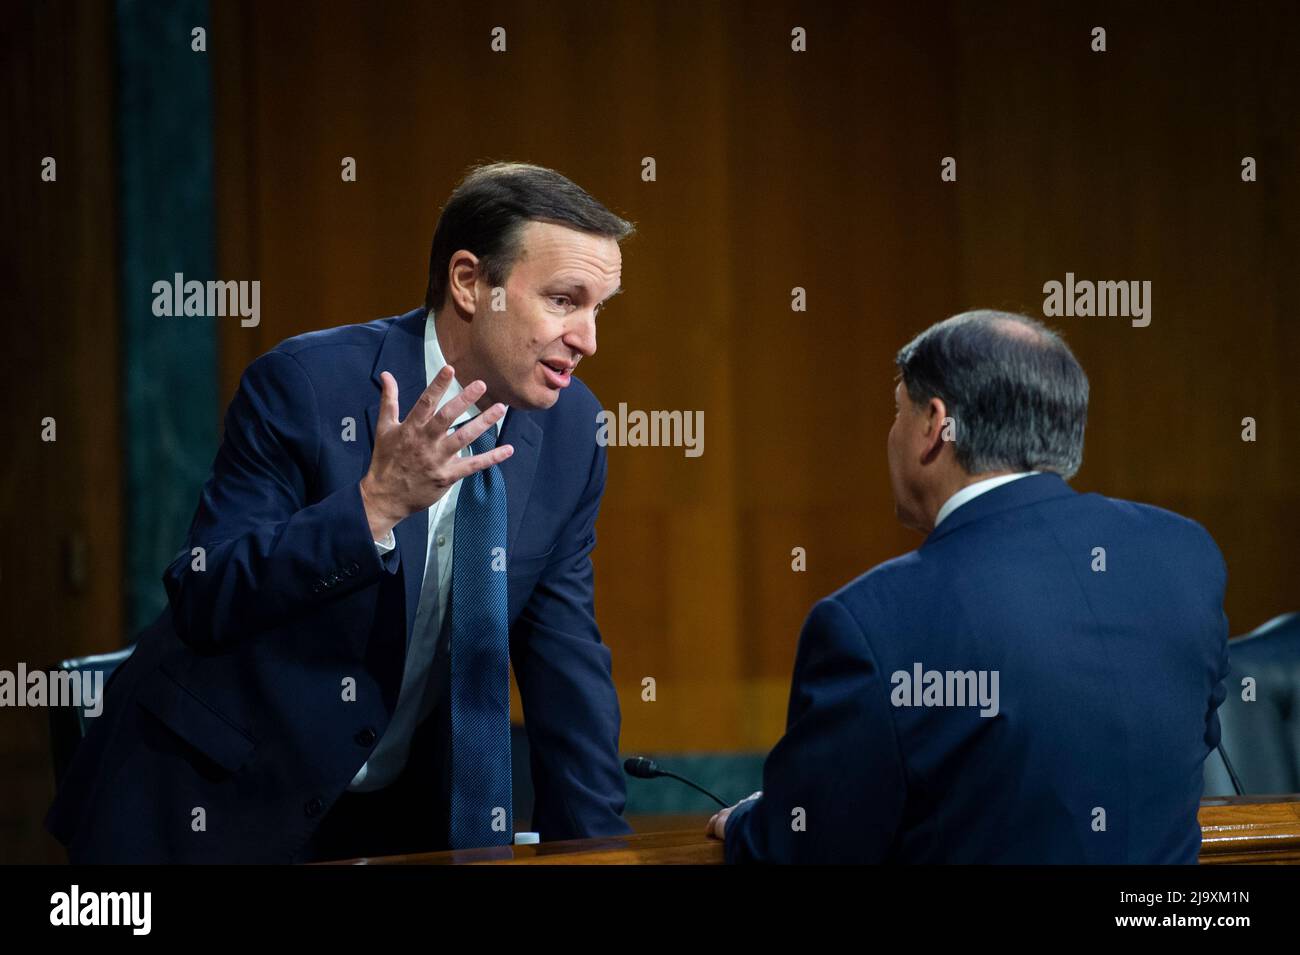 Washington, United States Of America. 25th May, 2022. United States Senator Chris Murphy (Democrat of Connecticut), left, talks with United States Senator Mike Rounds (Republican of South Dakota) prior to a Senate Committee on Foreign Relations hearing to examine the JCPOA negotiations and United States' policy on Iran moving forward, in the Dirksen Senate Office Building in Washington, DC, Wednesday, May 25, 2022. Credit: Rod Lamkey/CNP/Sipa USA Credit: Sipa USA/Alamy Live News Stock Photo